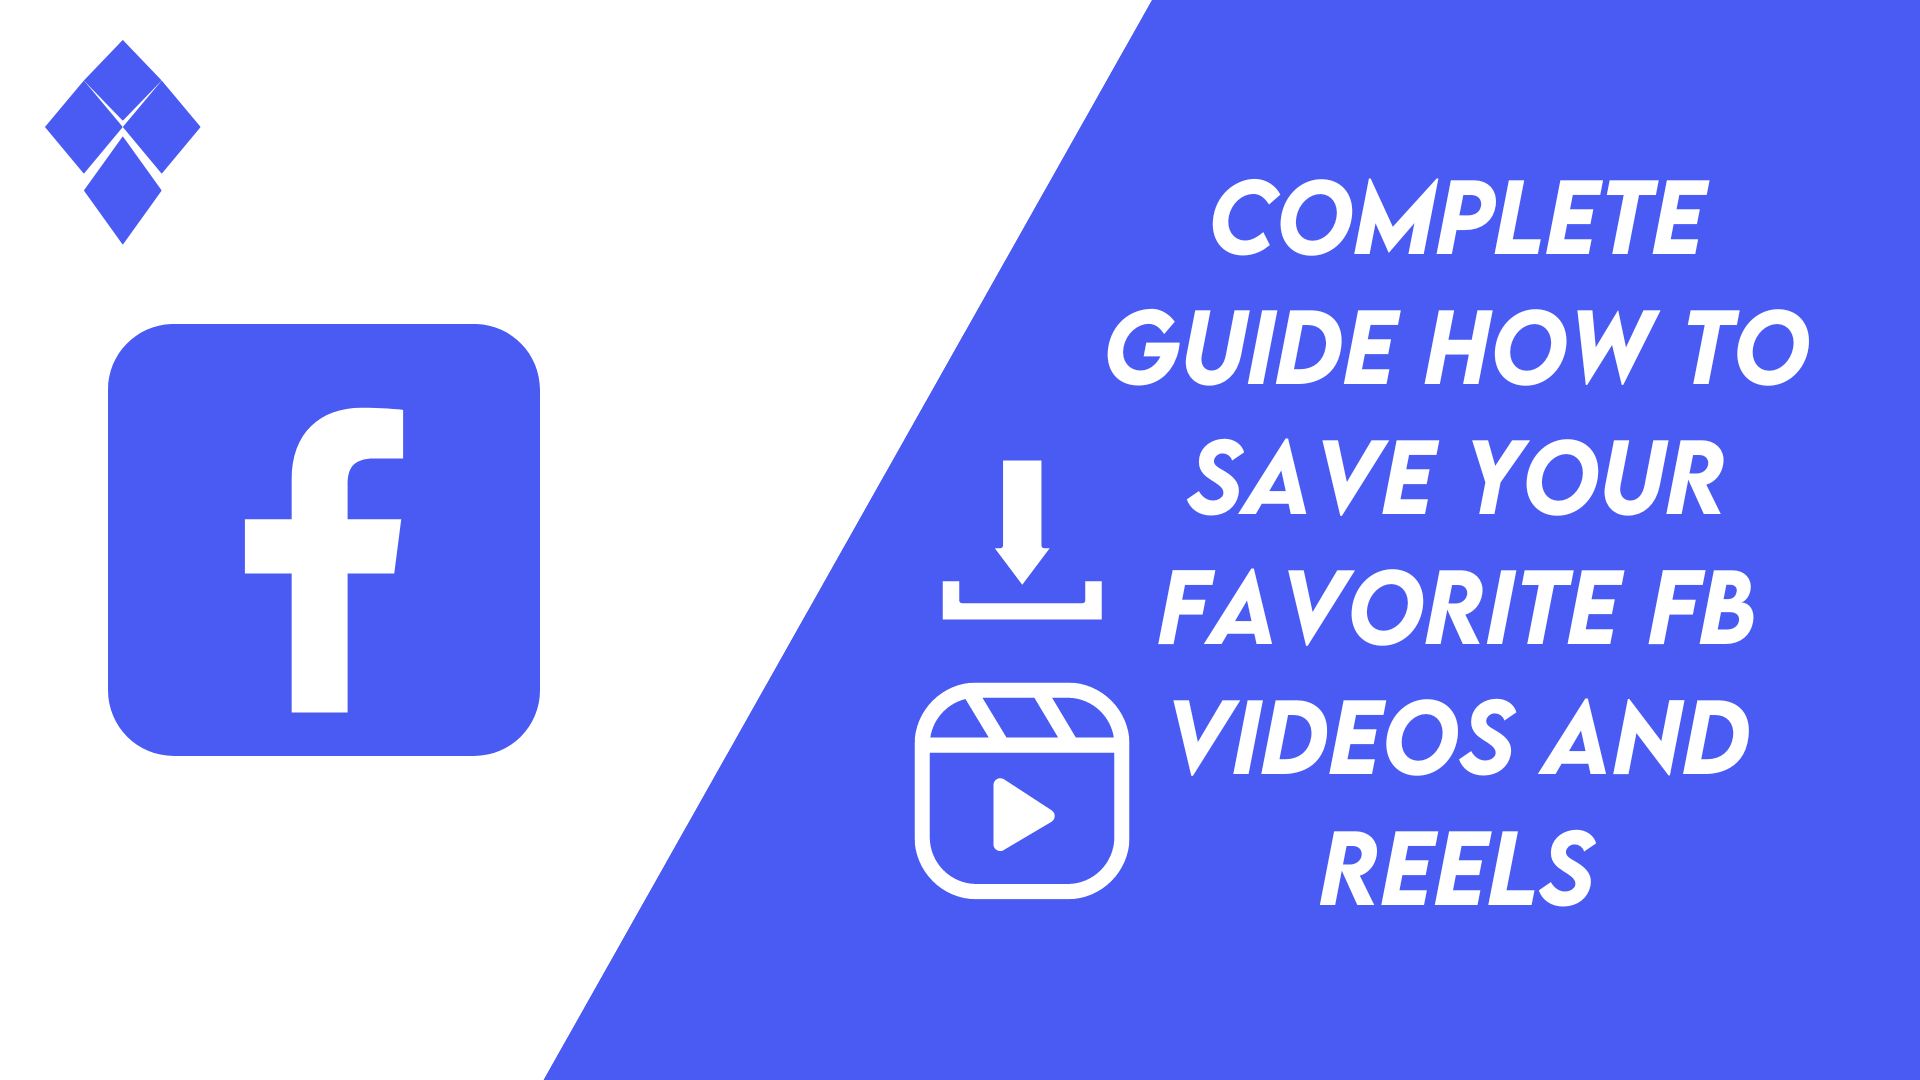 How to Save Your Favorite Fb Videos and Reels